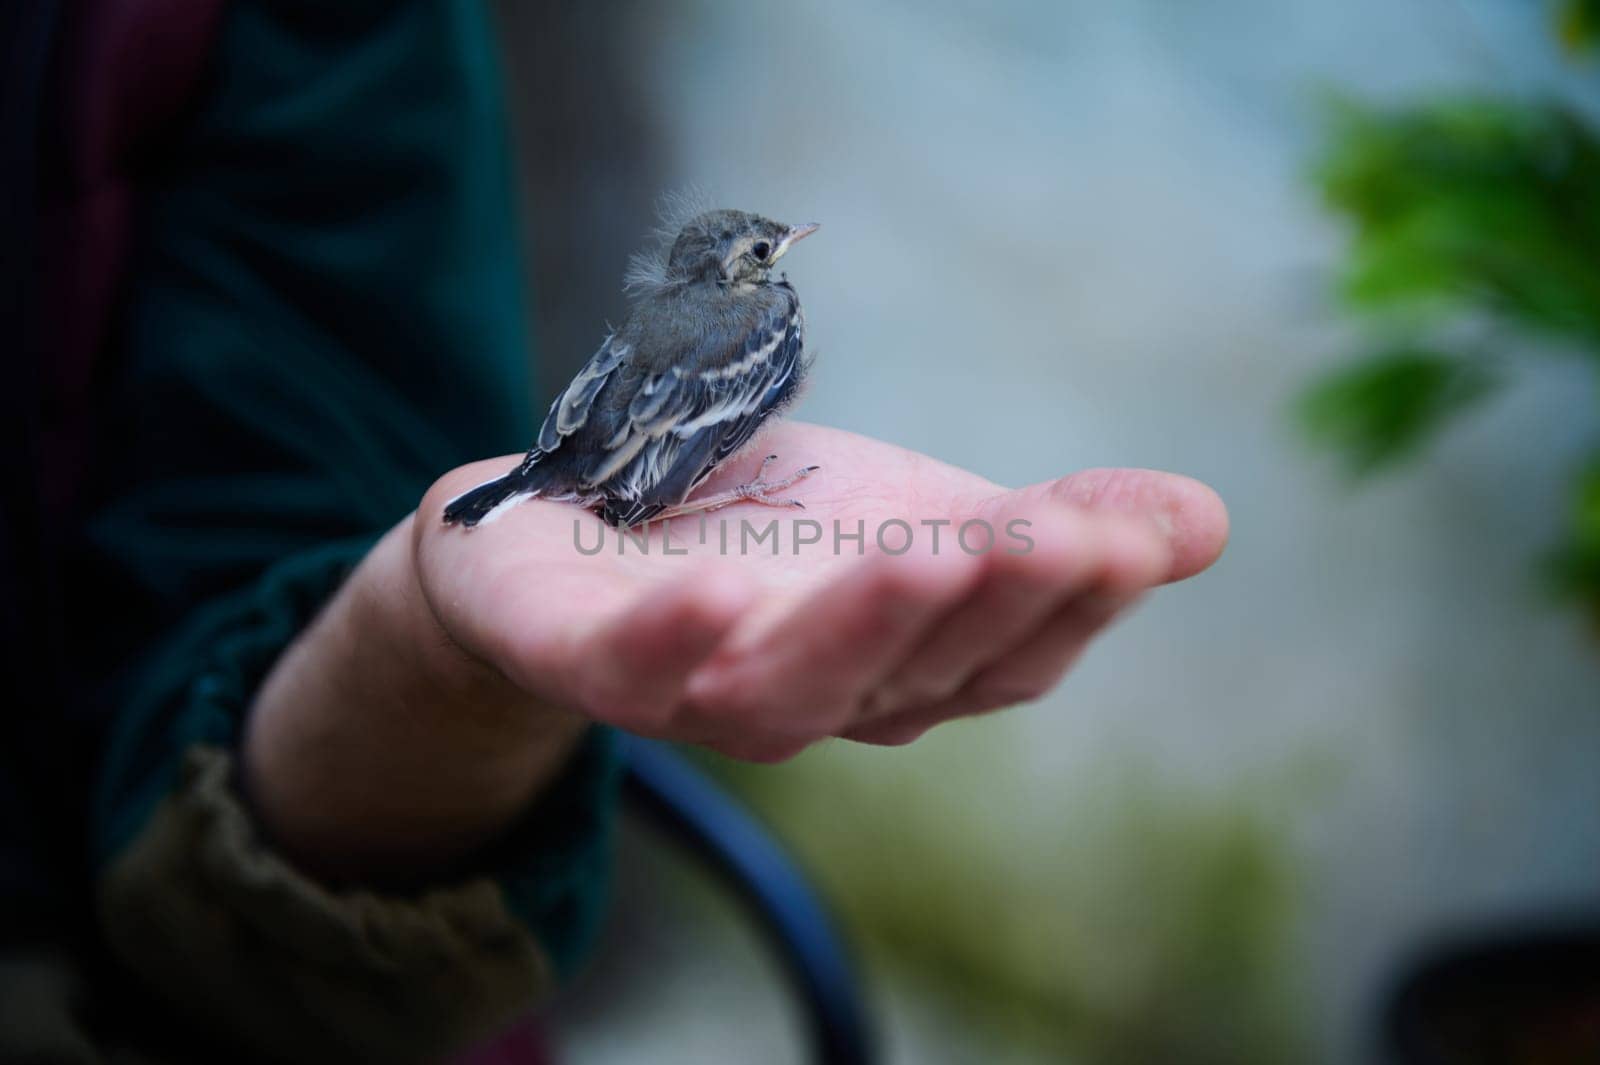 People and animals themes. Close-up view of a small baby bird sitting in the on the outstretched palm.